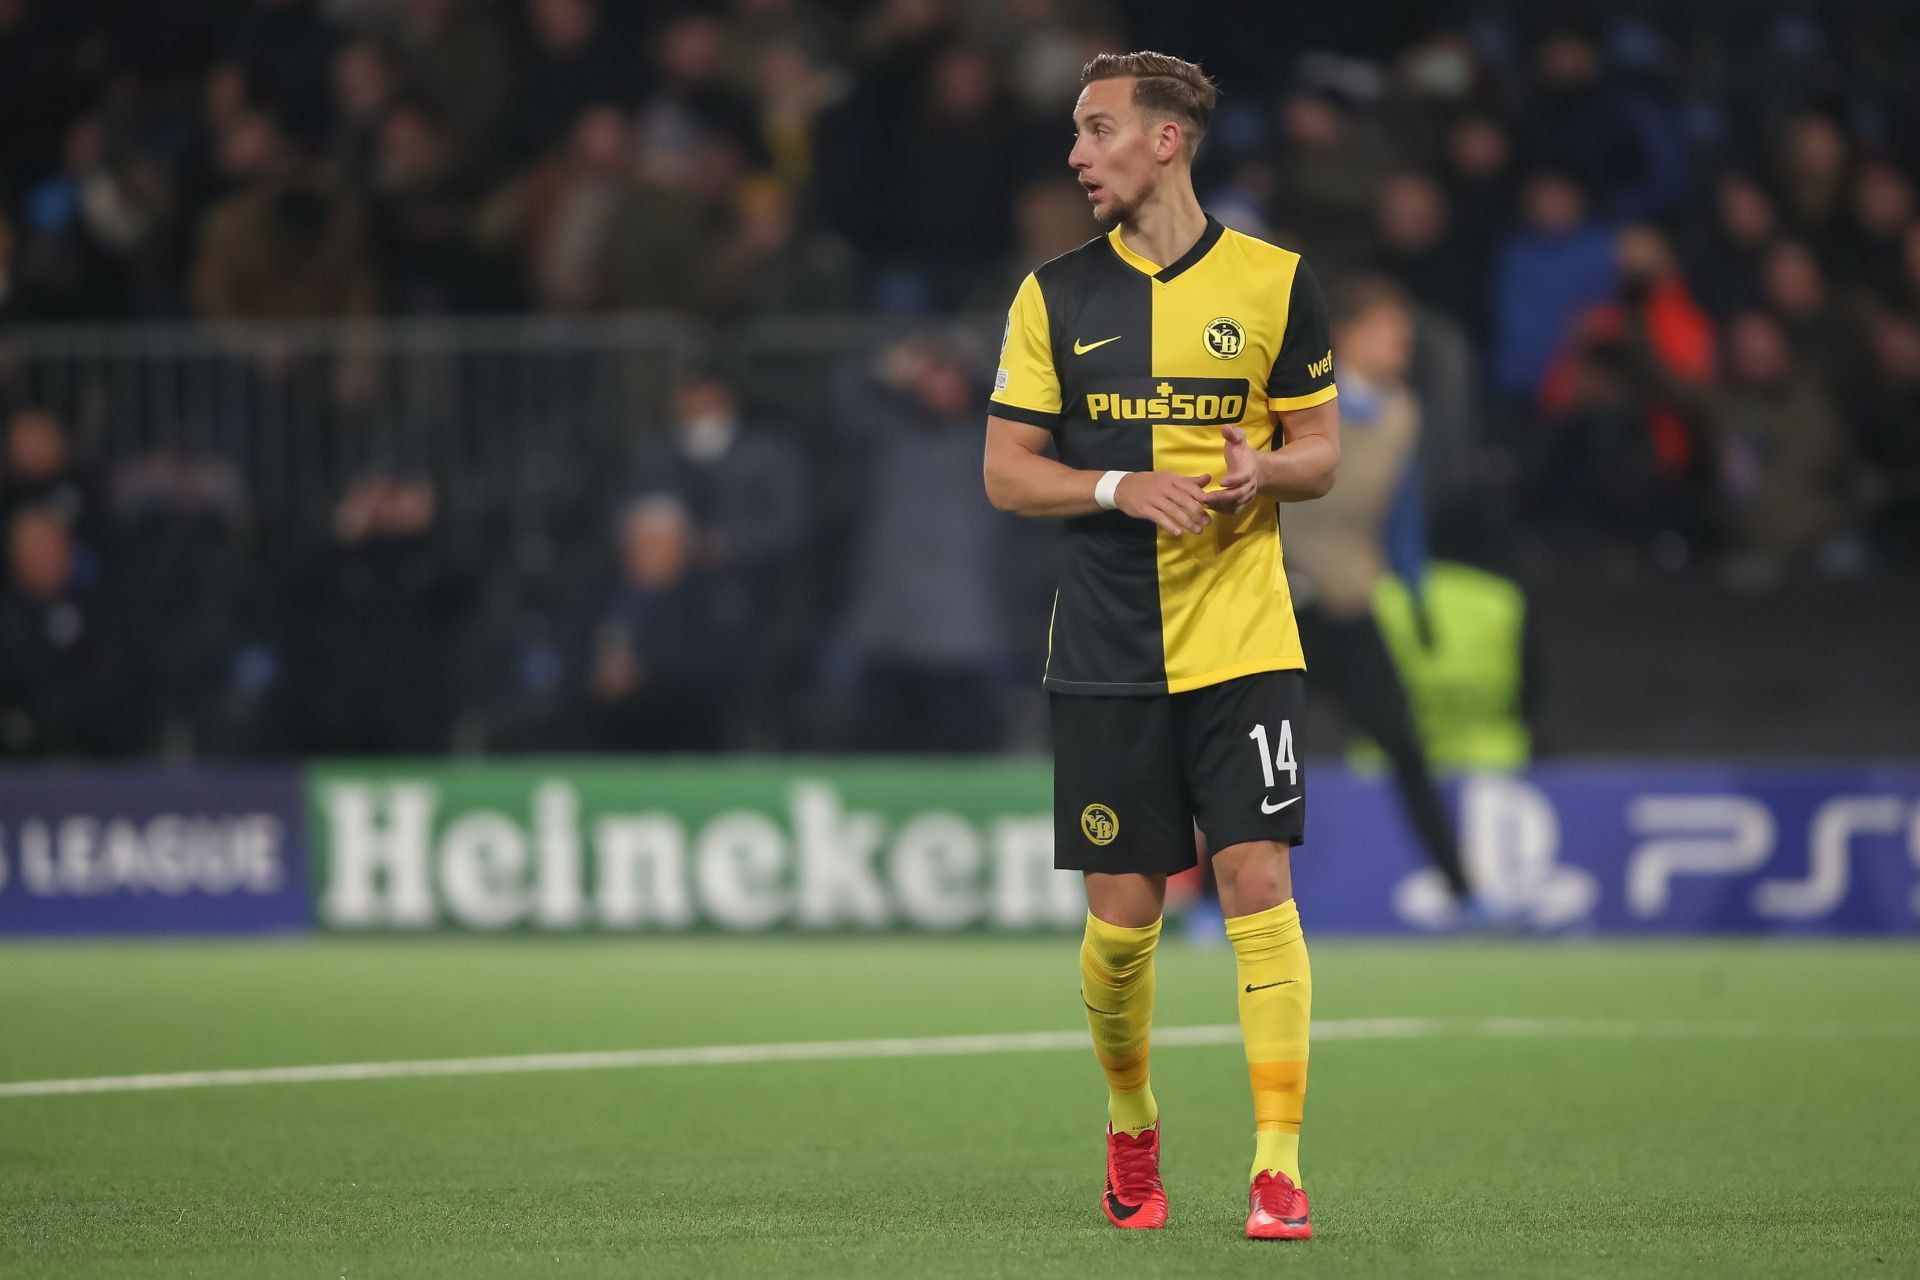 Young Boys and Grasshopper Zurich square off on Sunday